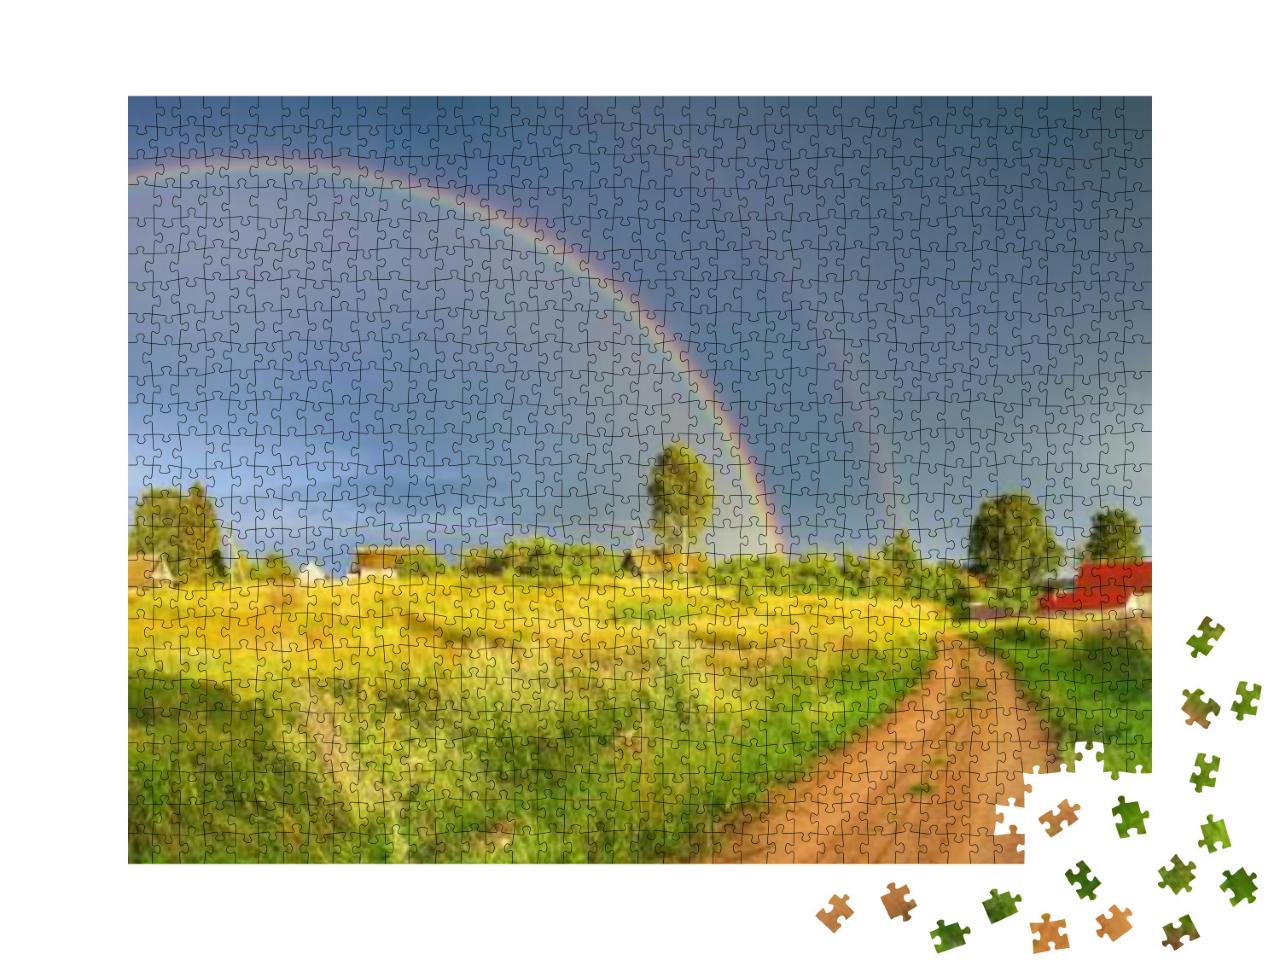 Rainbow Over Stormy Sky. Rural Landscape with Rainbow Ove... Jigsaw Puzzle with 1000 pieces